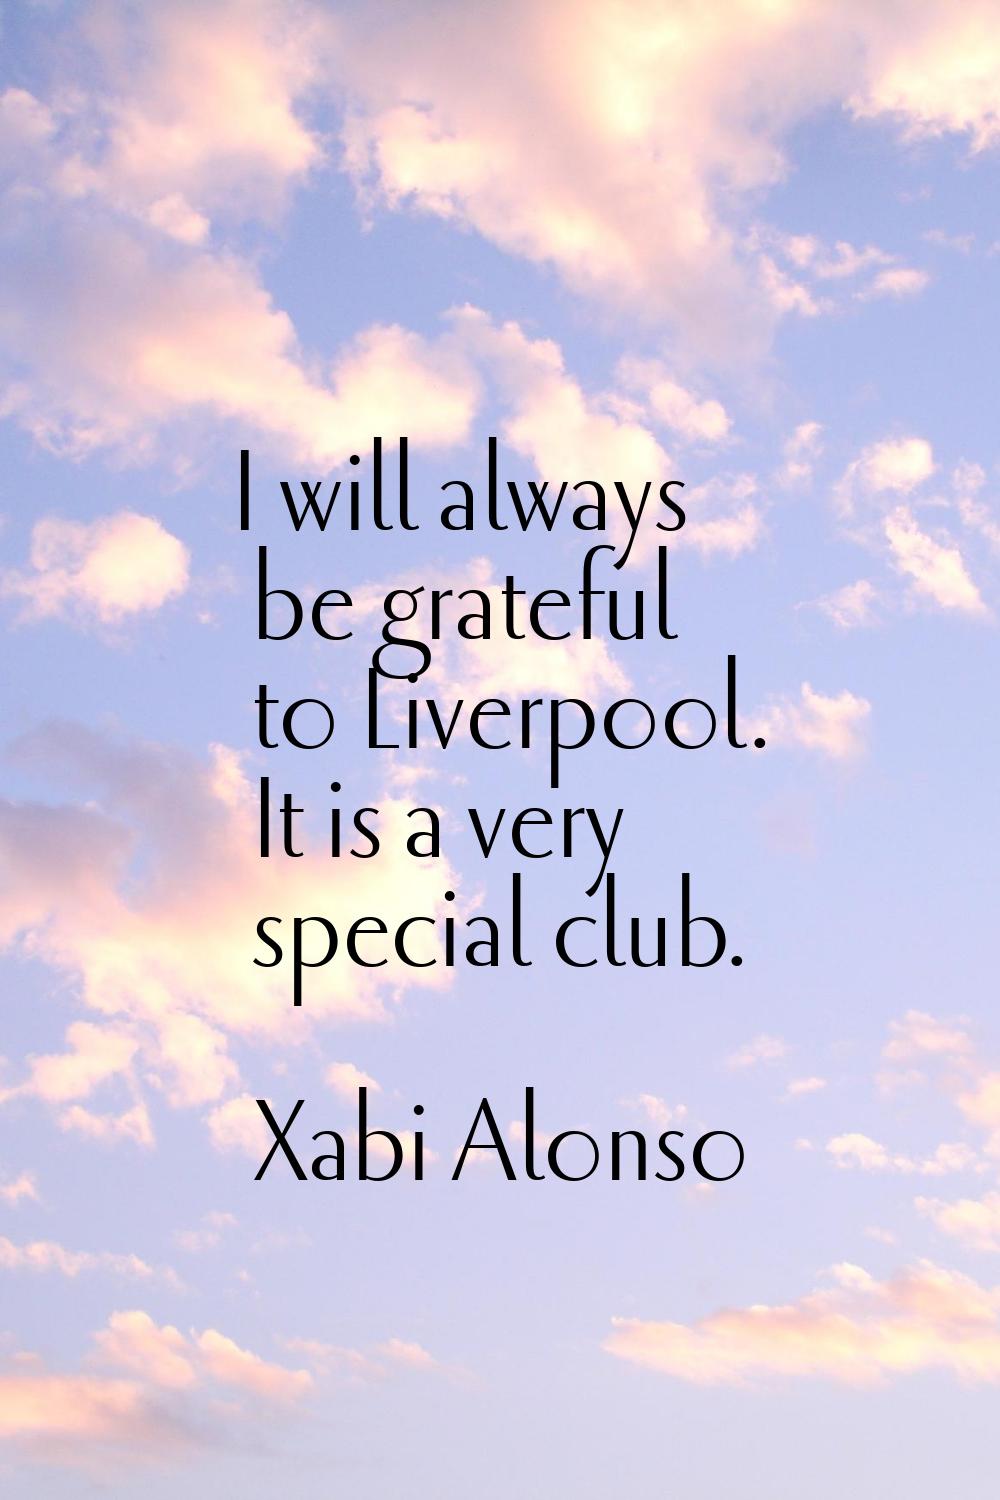 I will always be grateful to Liverpool. It is a very special club.